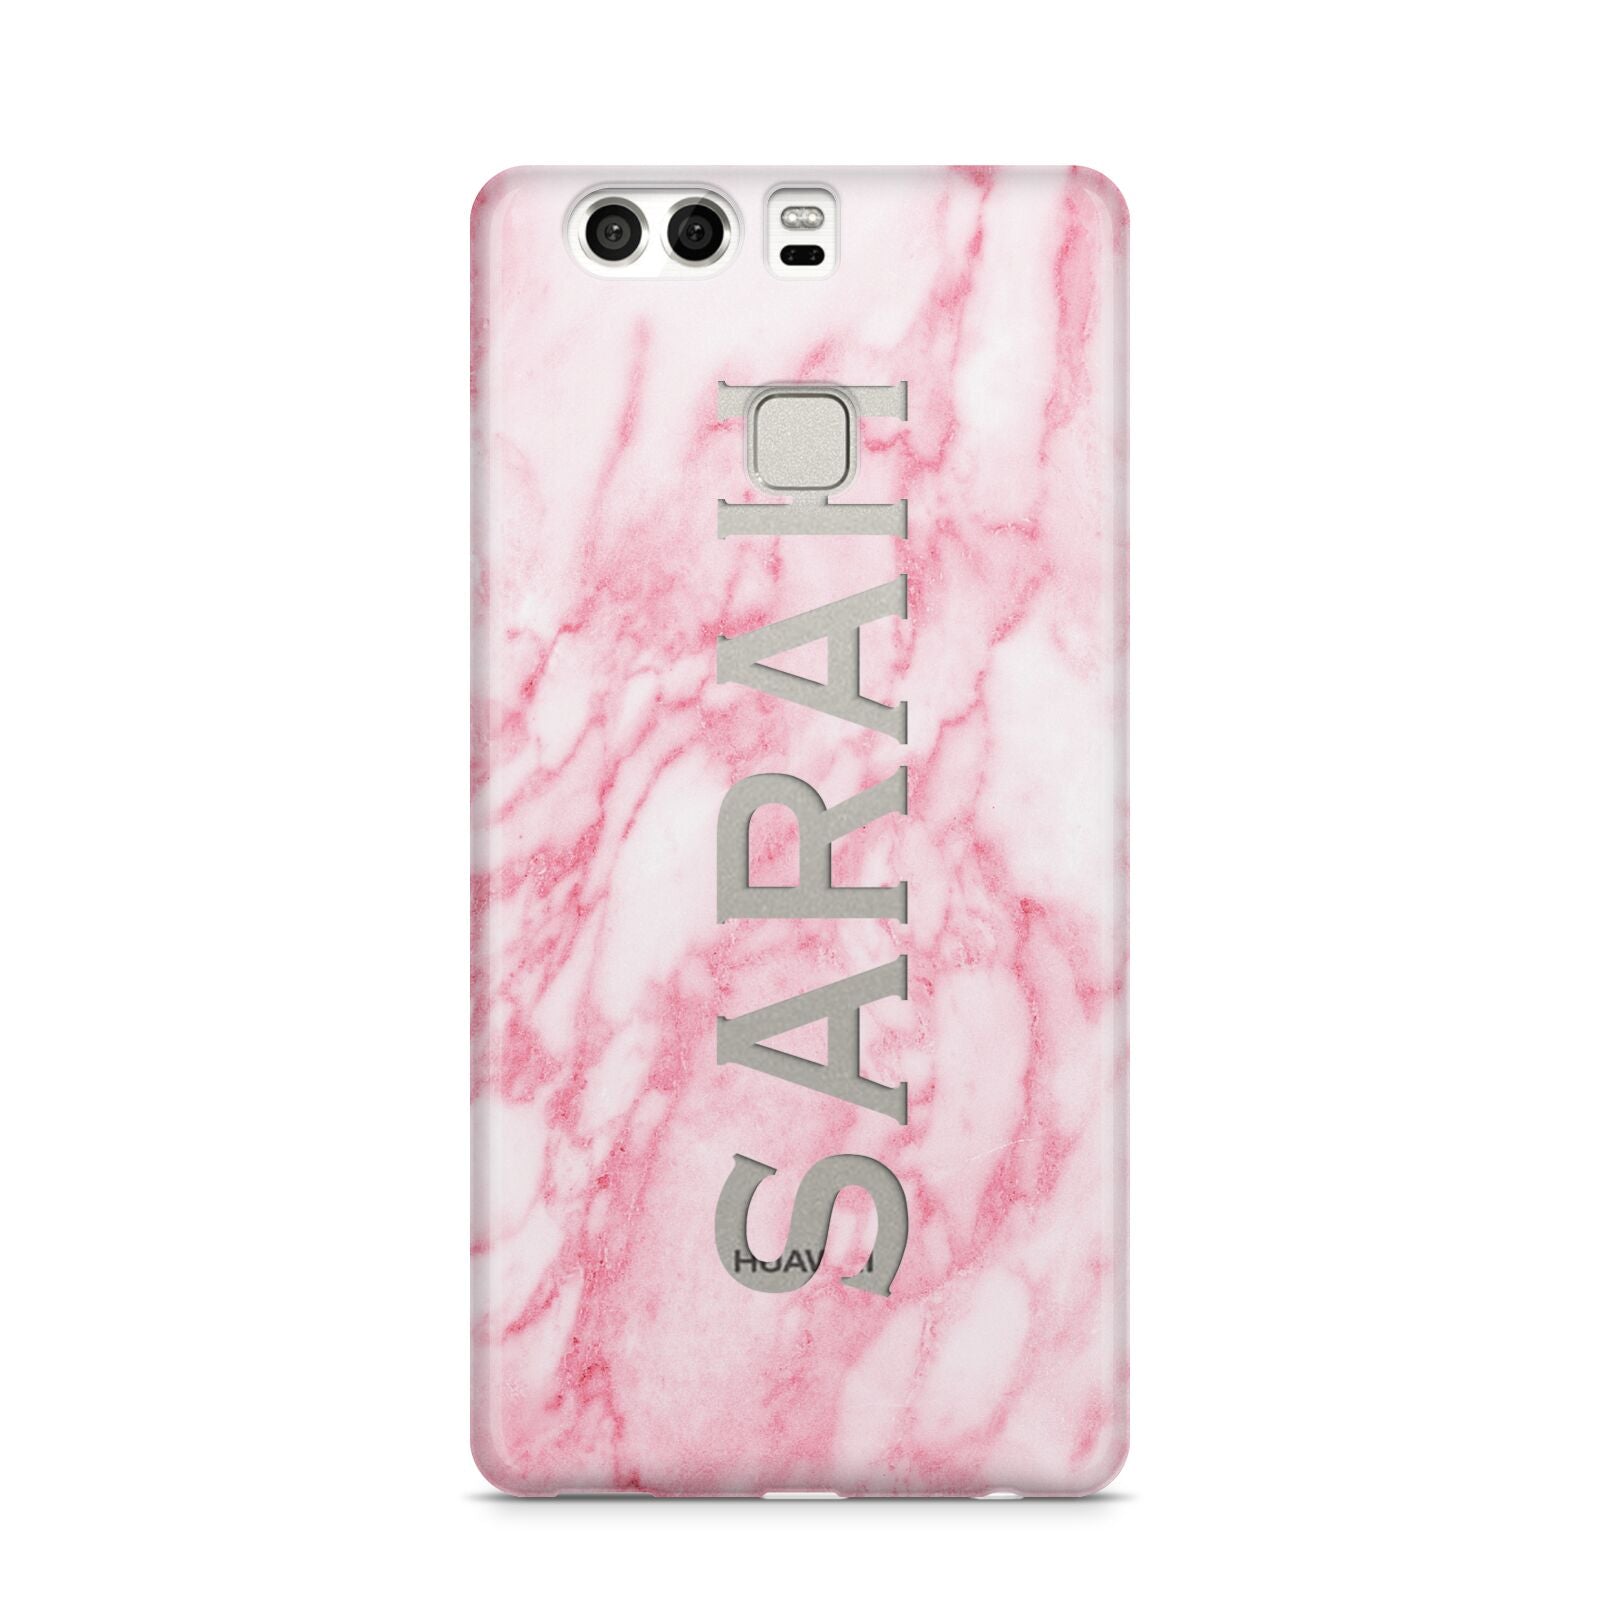 Personalised Clear Name Cutout Pink Marble Custom Huawei P9 Case